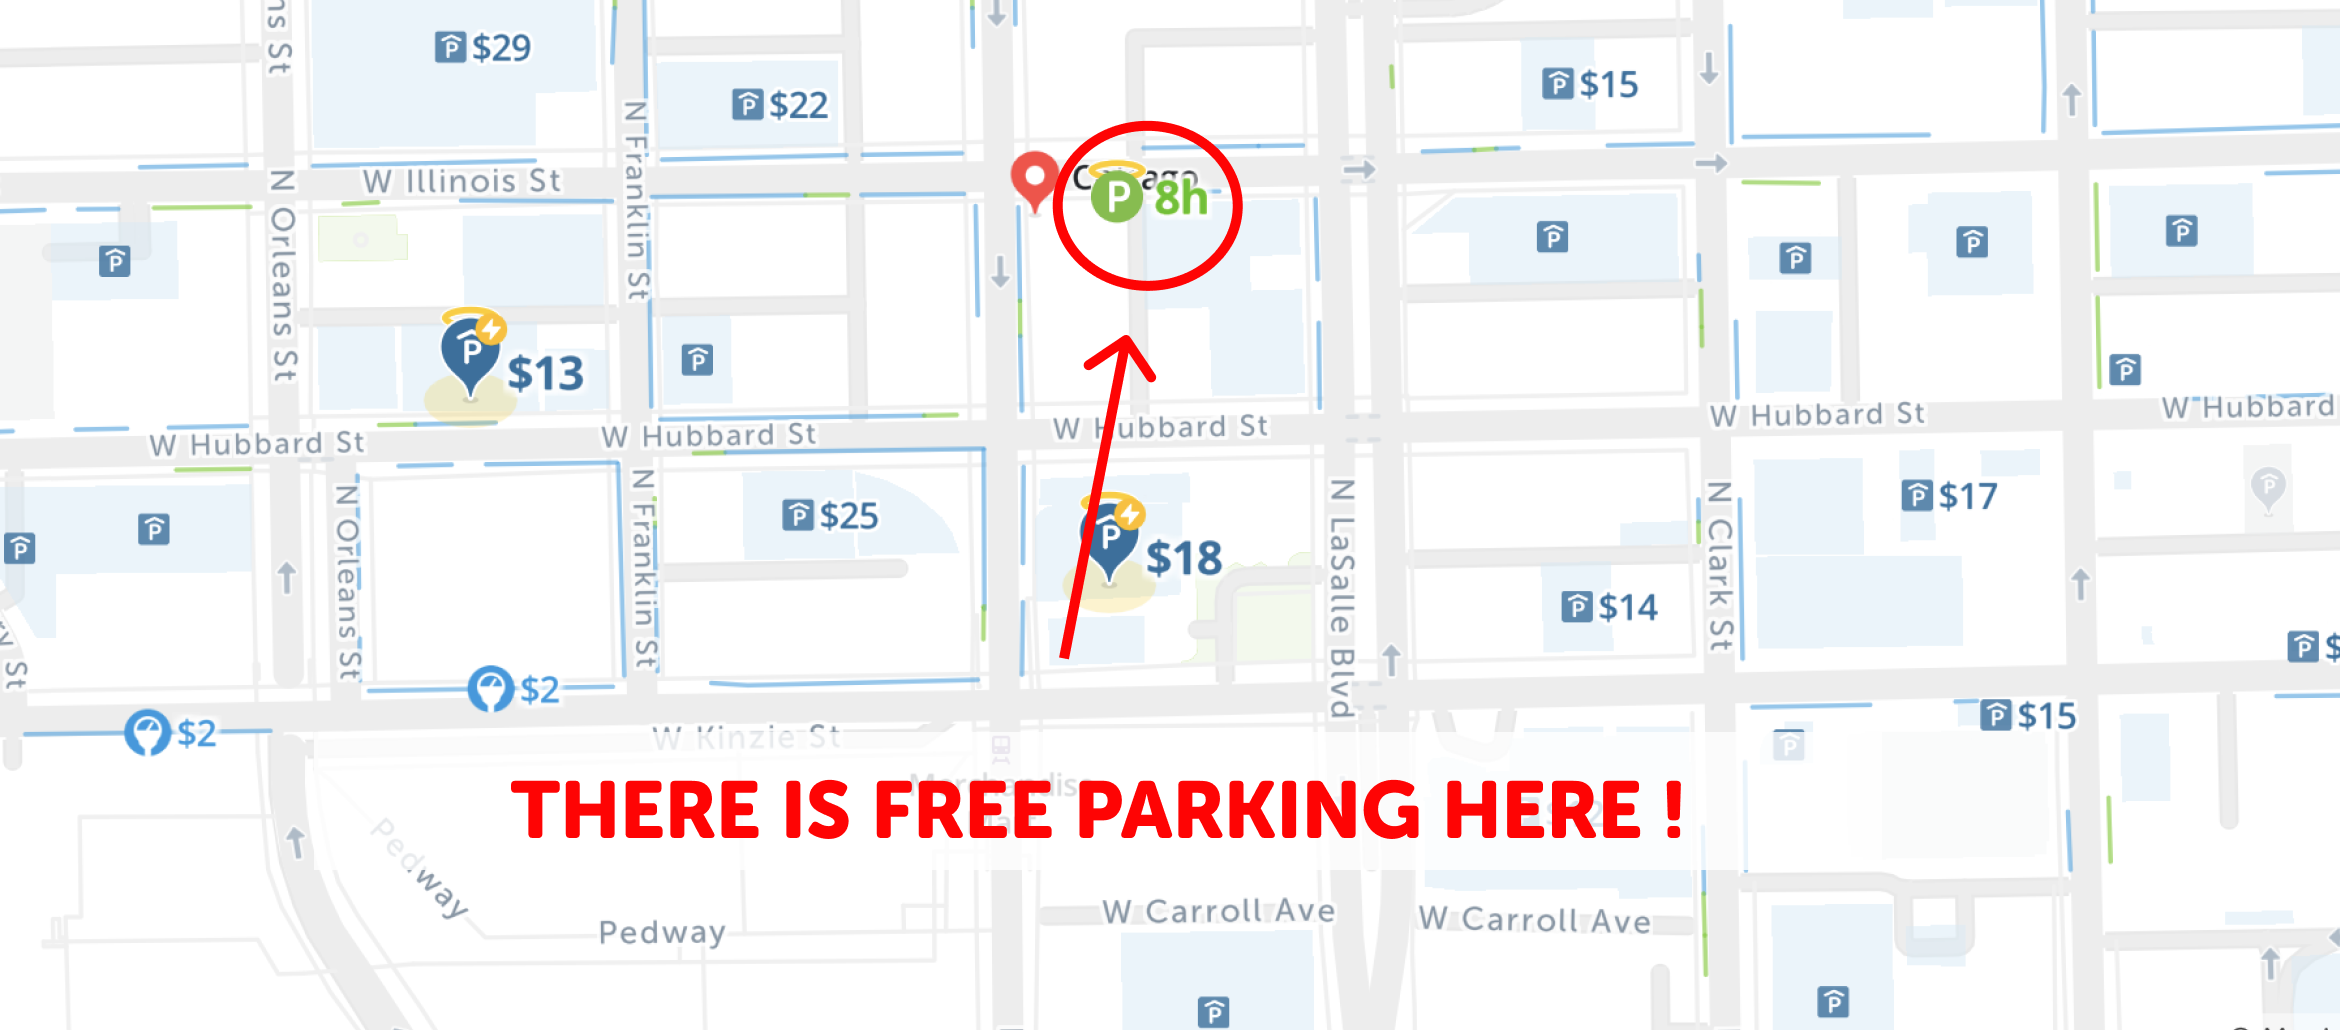 Parking in Chicago: a comprehensive guide on best spots